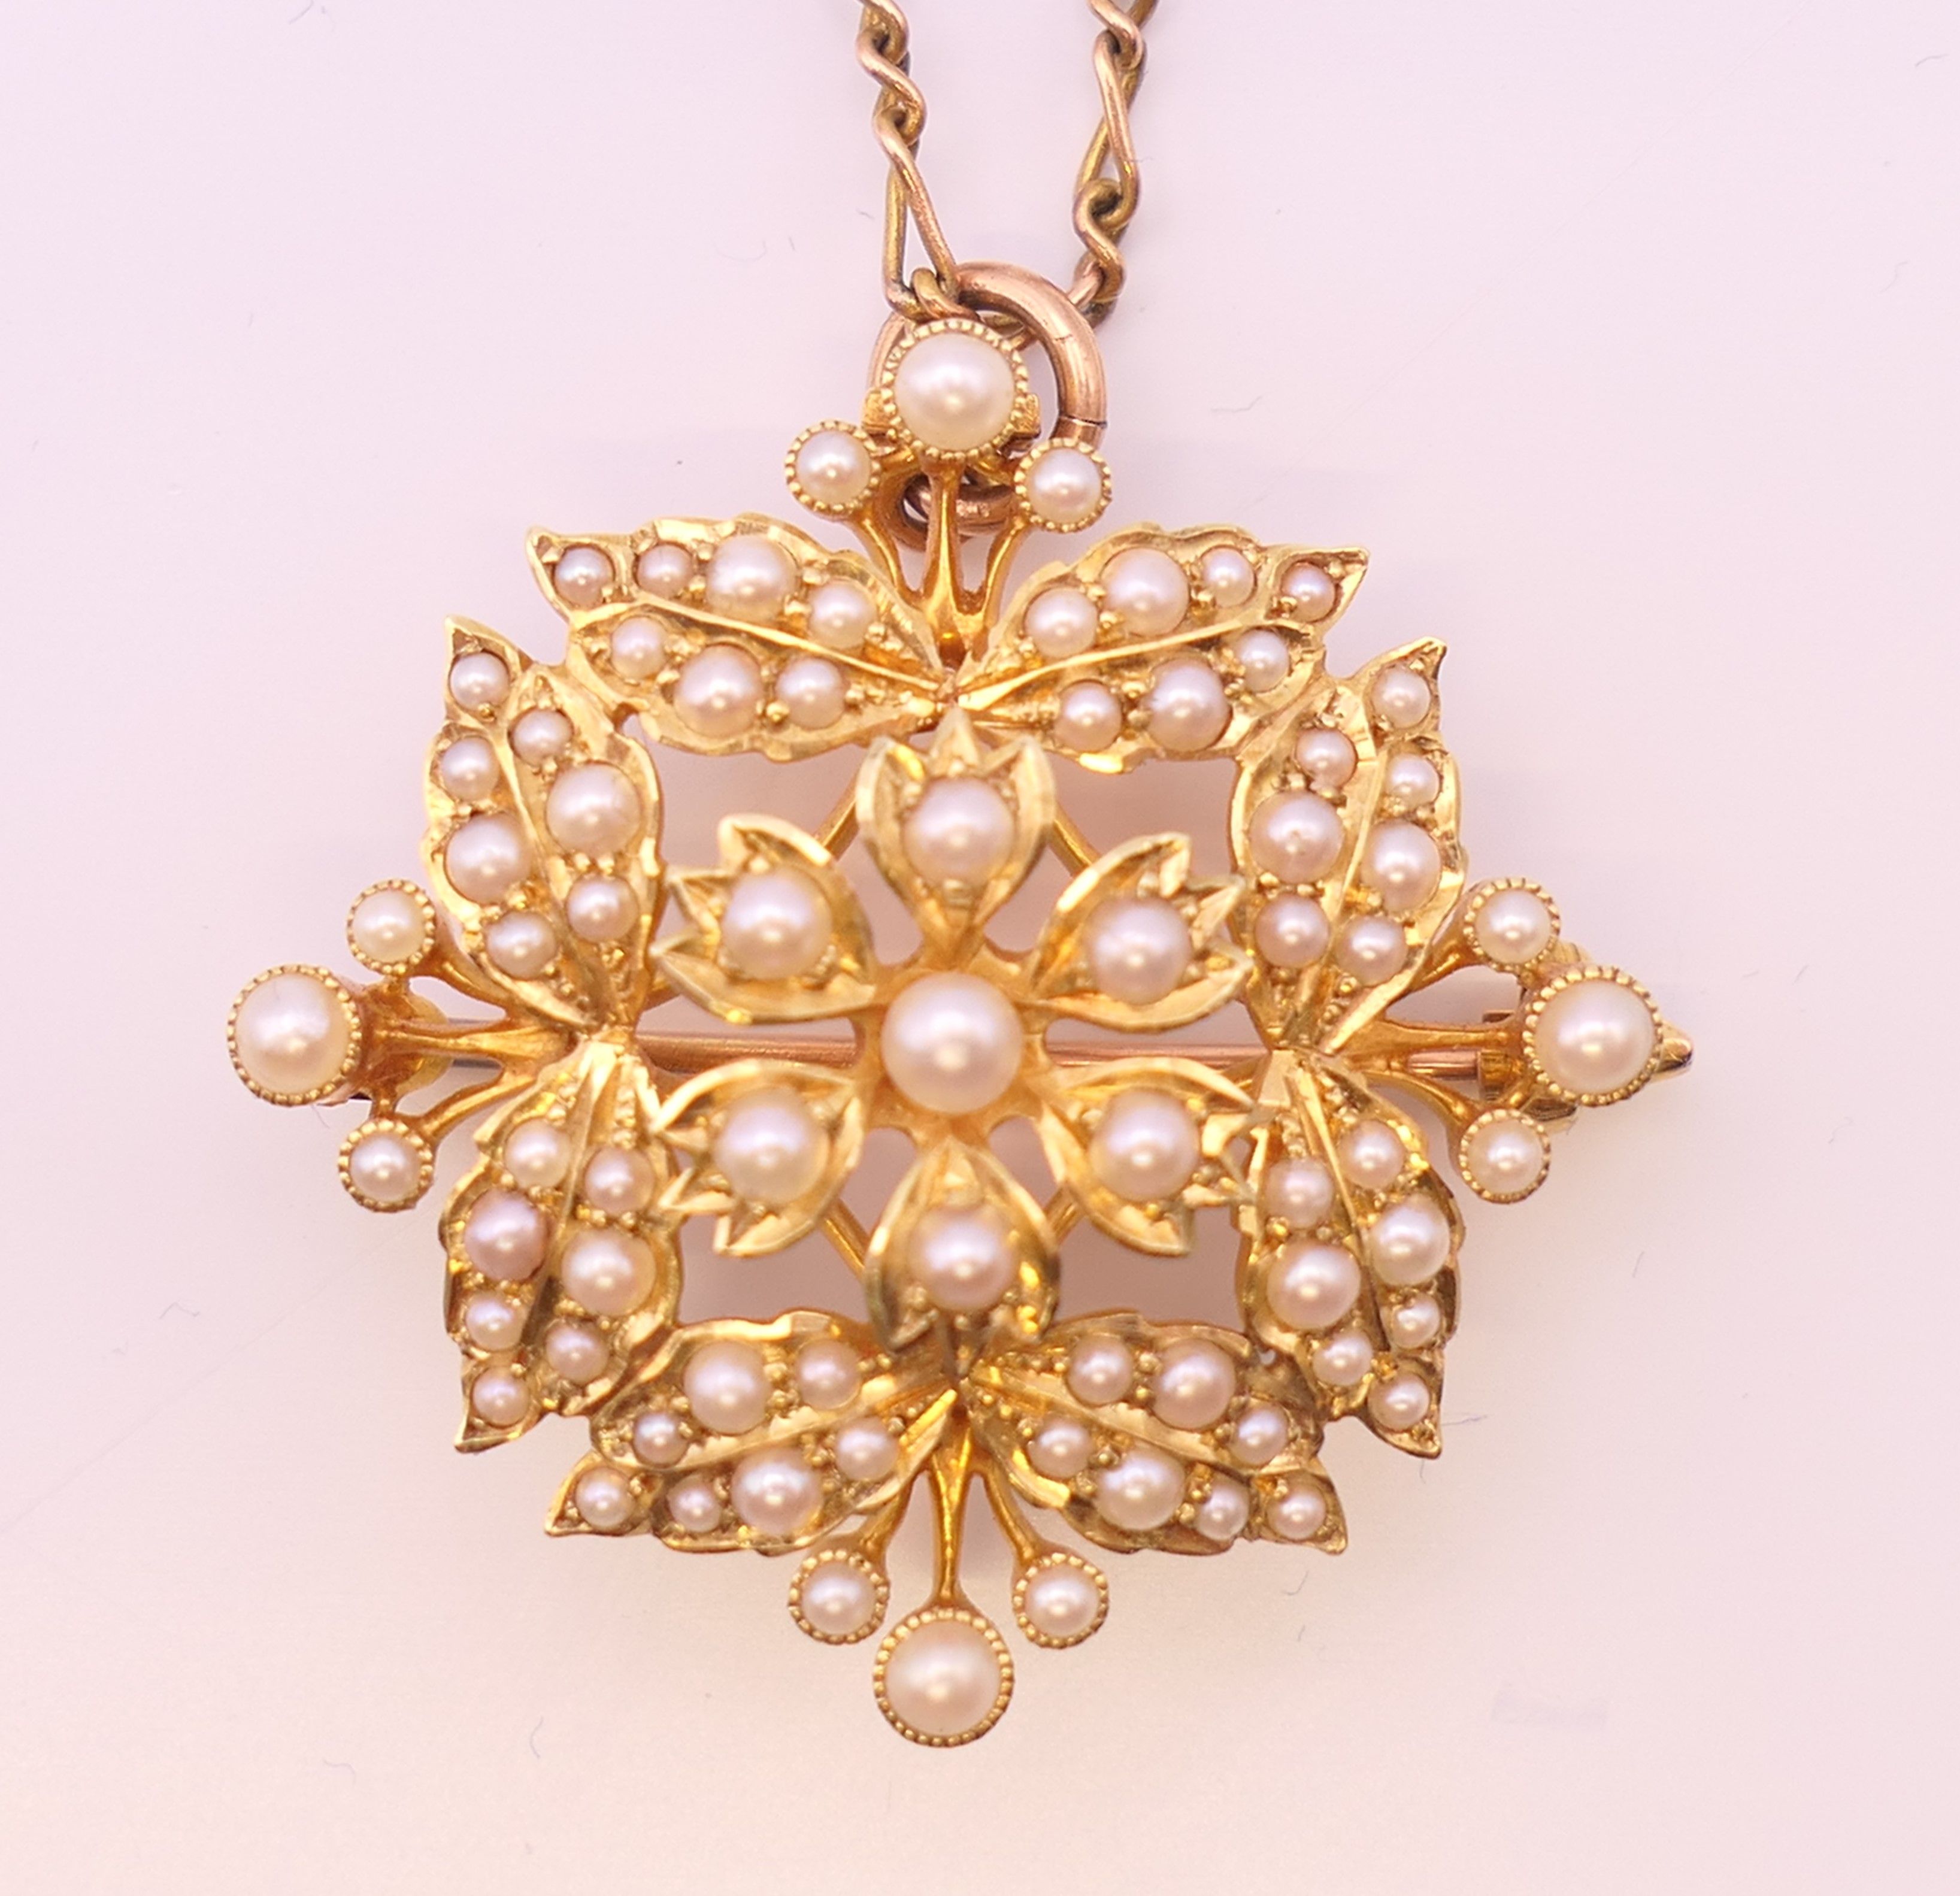 A 15 ct gold and seed pearl pendant/brooch on a 9 ct gold chain.